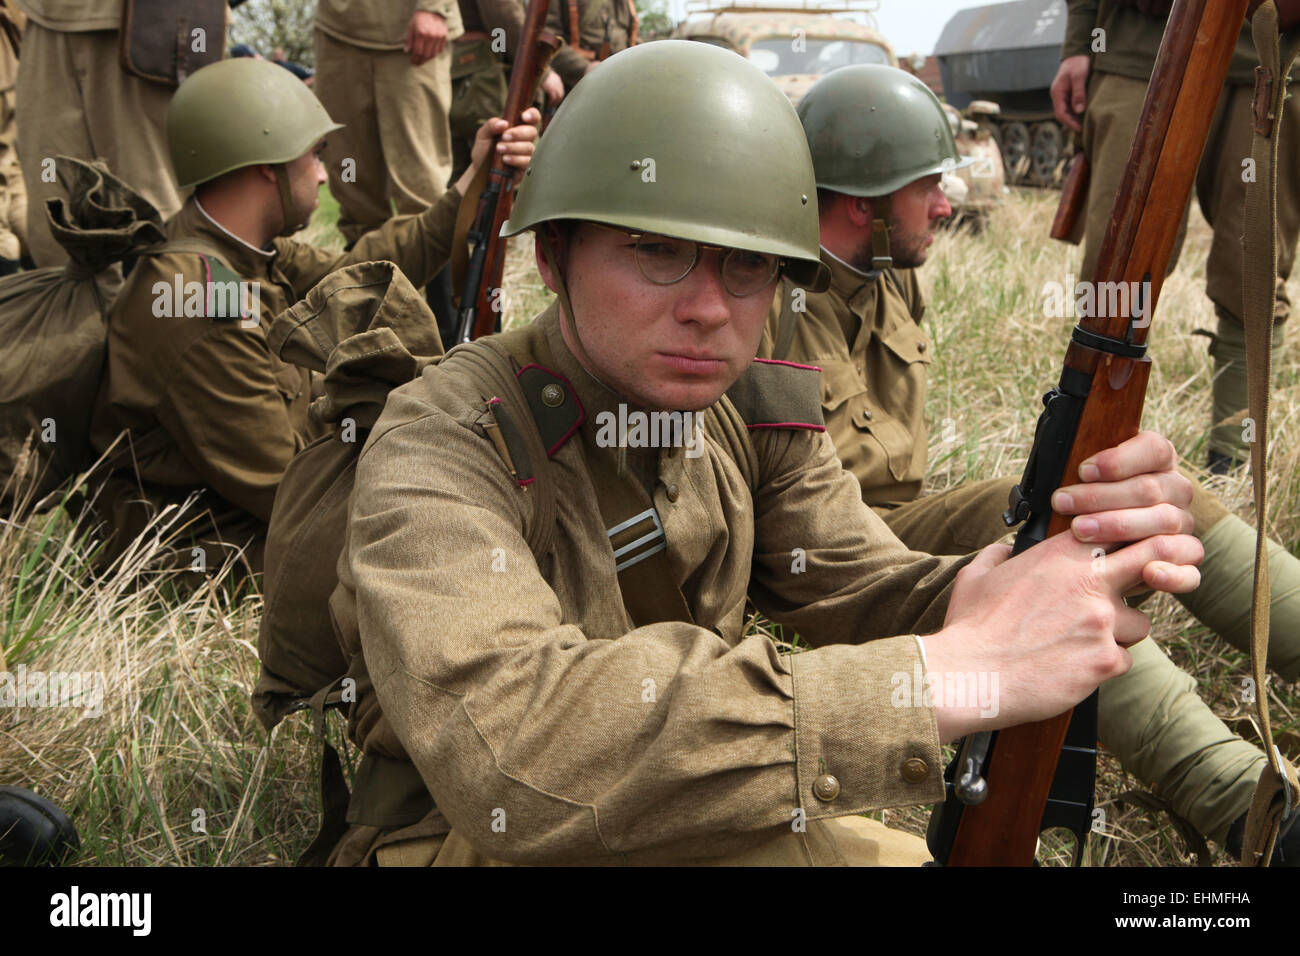 Re-enactors dressed as Soviet soldiers prepare to stage the Battle at Orechov (1945) near Brno, Czech Republic. The Battle at Orechov in April 1945 was the biggest tank battle in the last days of the World War II in South Moravia, Czechoslovakia. Stock Photo